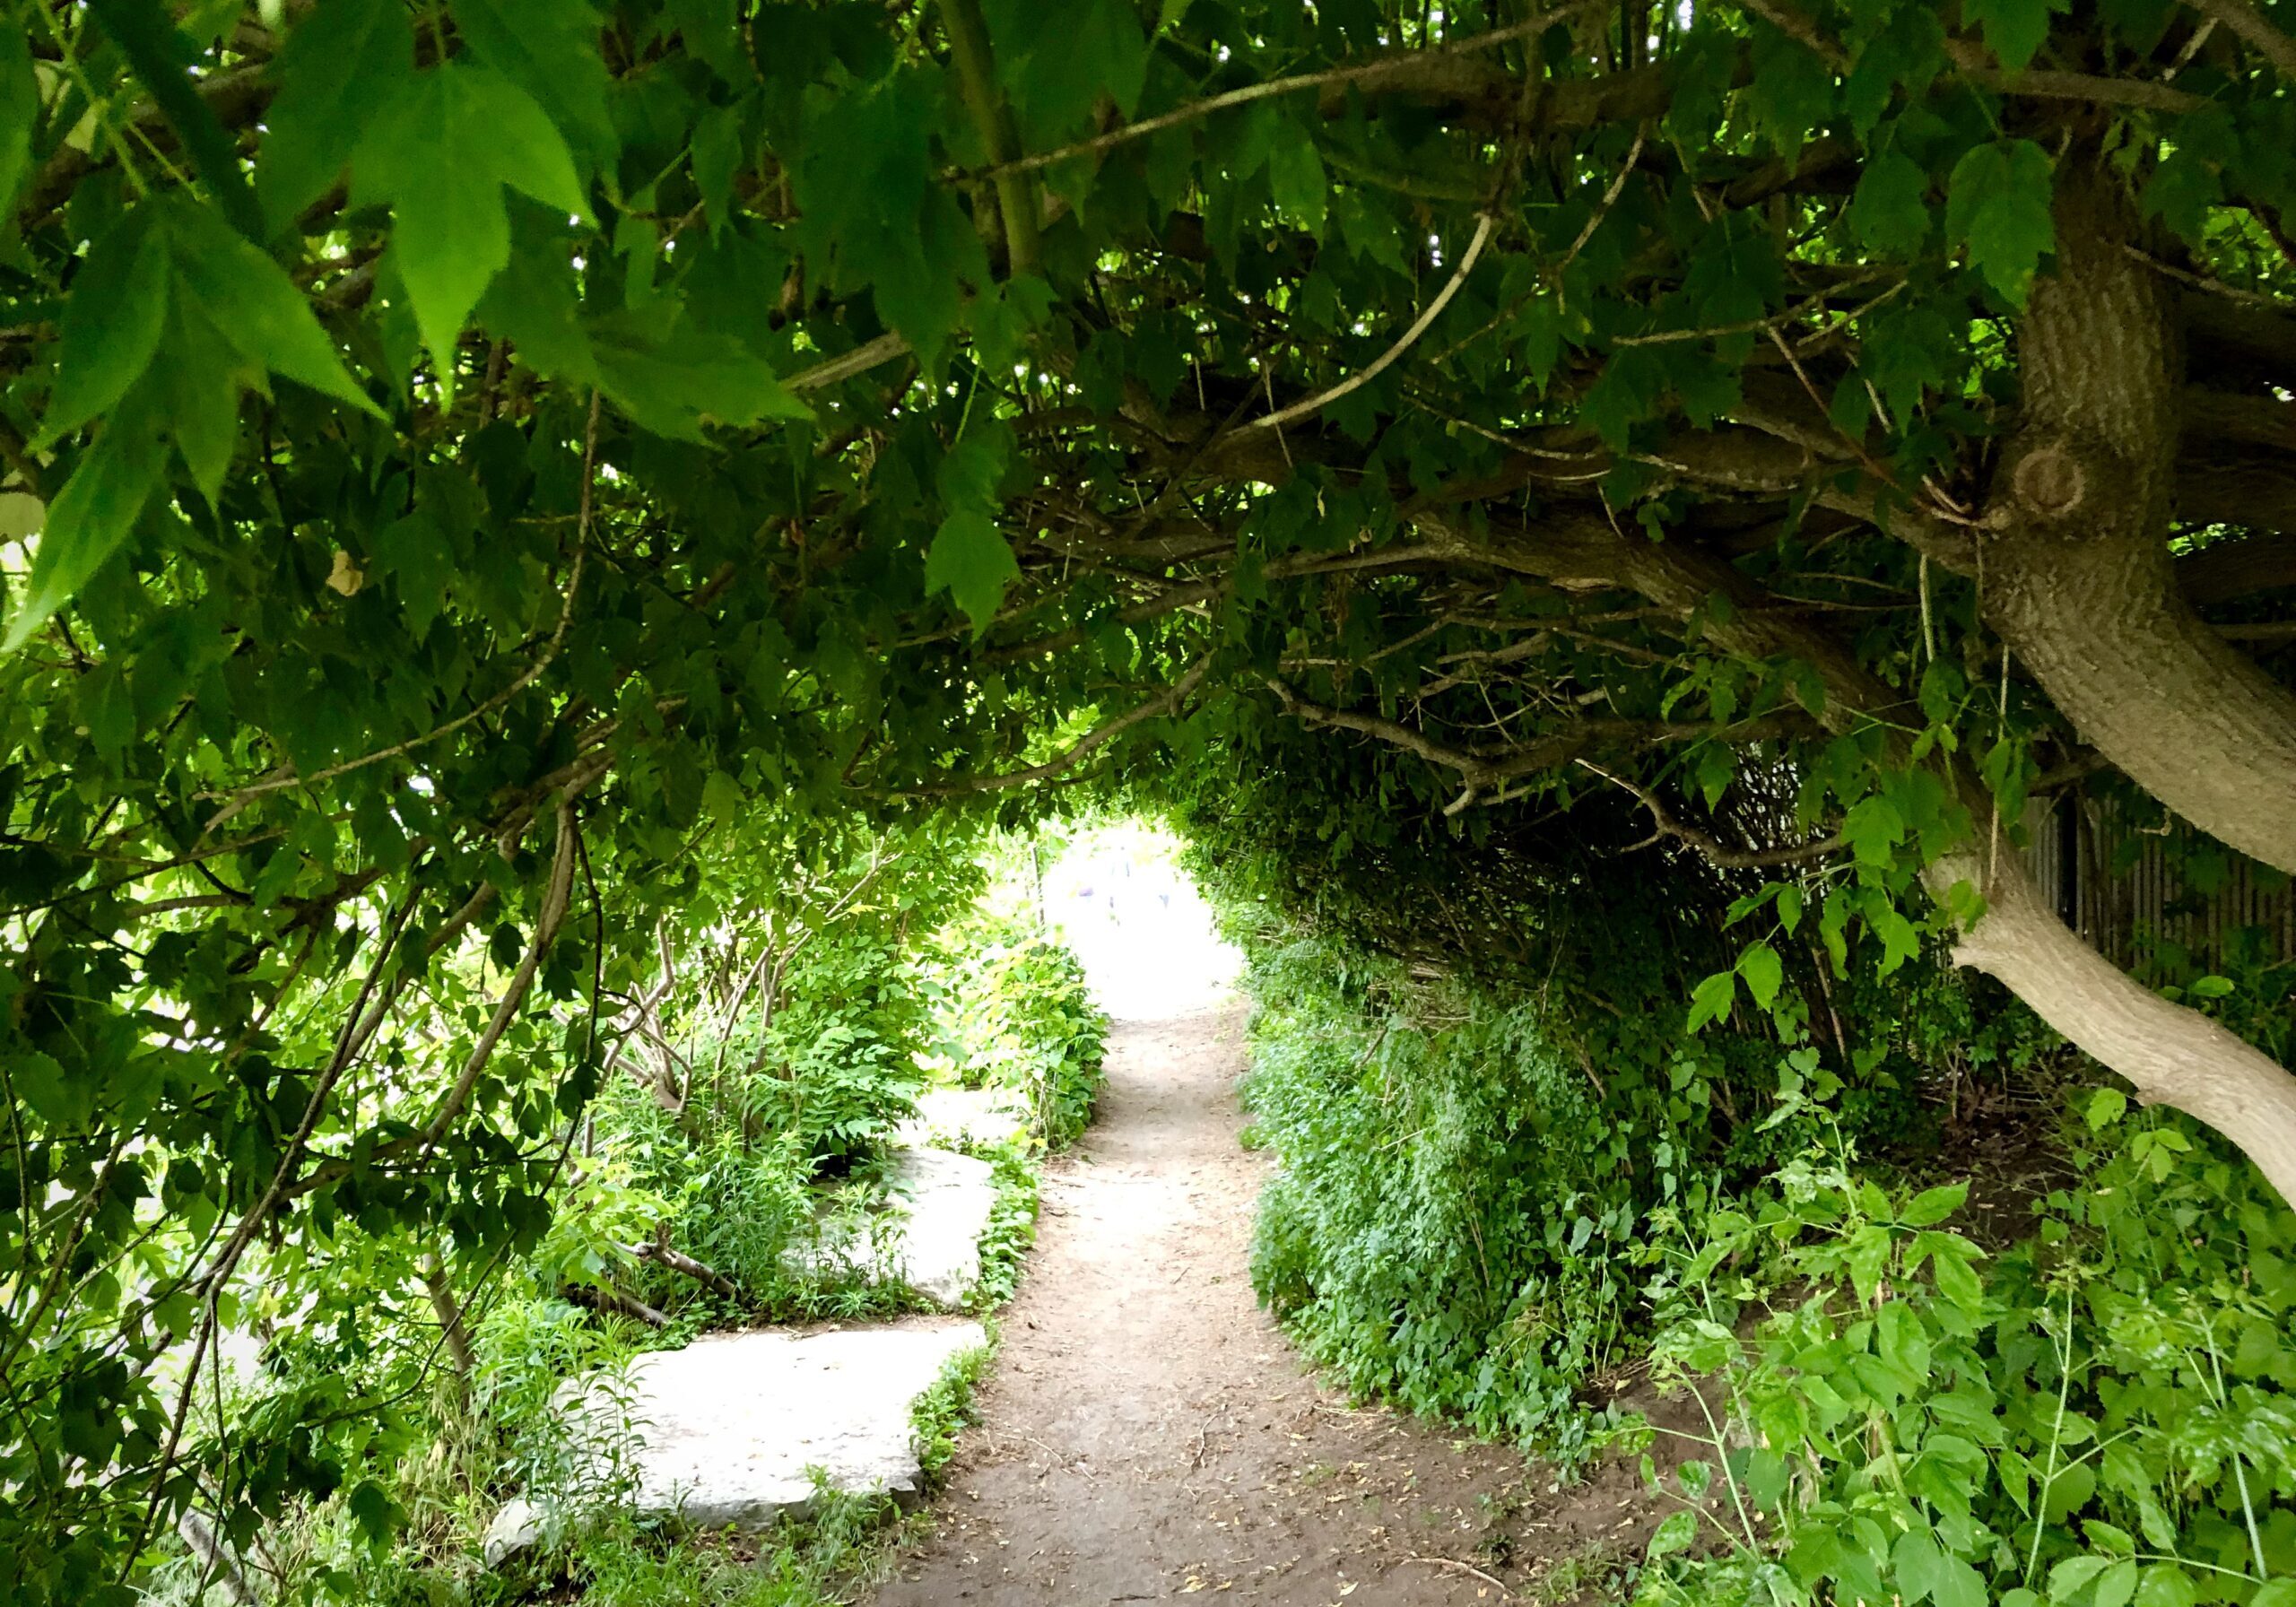 a dirt path appears between greenery and under trees